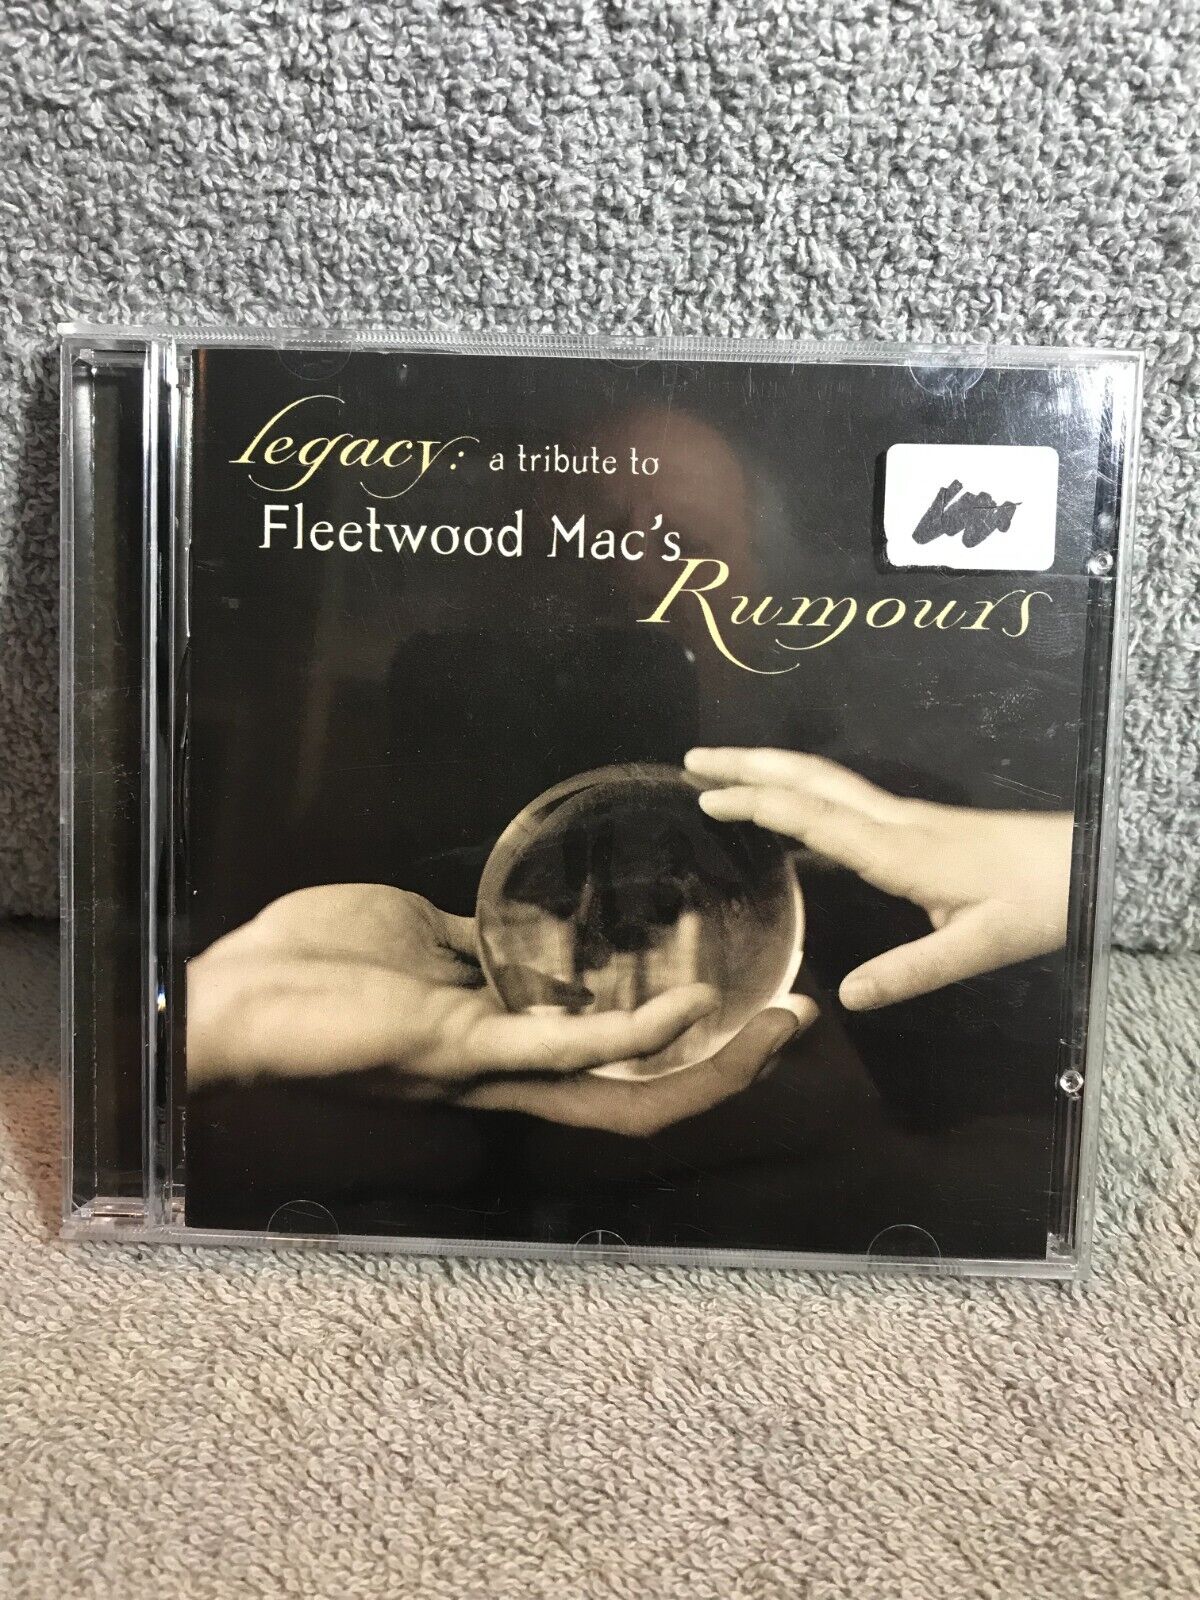 CD Title:A Tribute To Fleetwood Mac's Rumours:CD Lot #2 - 70's/80's Rock/Pop Compilation CD's. Choose Your Own. Updated 4/15